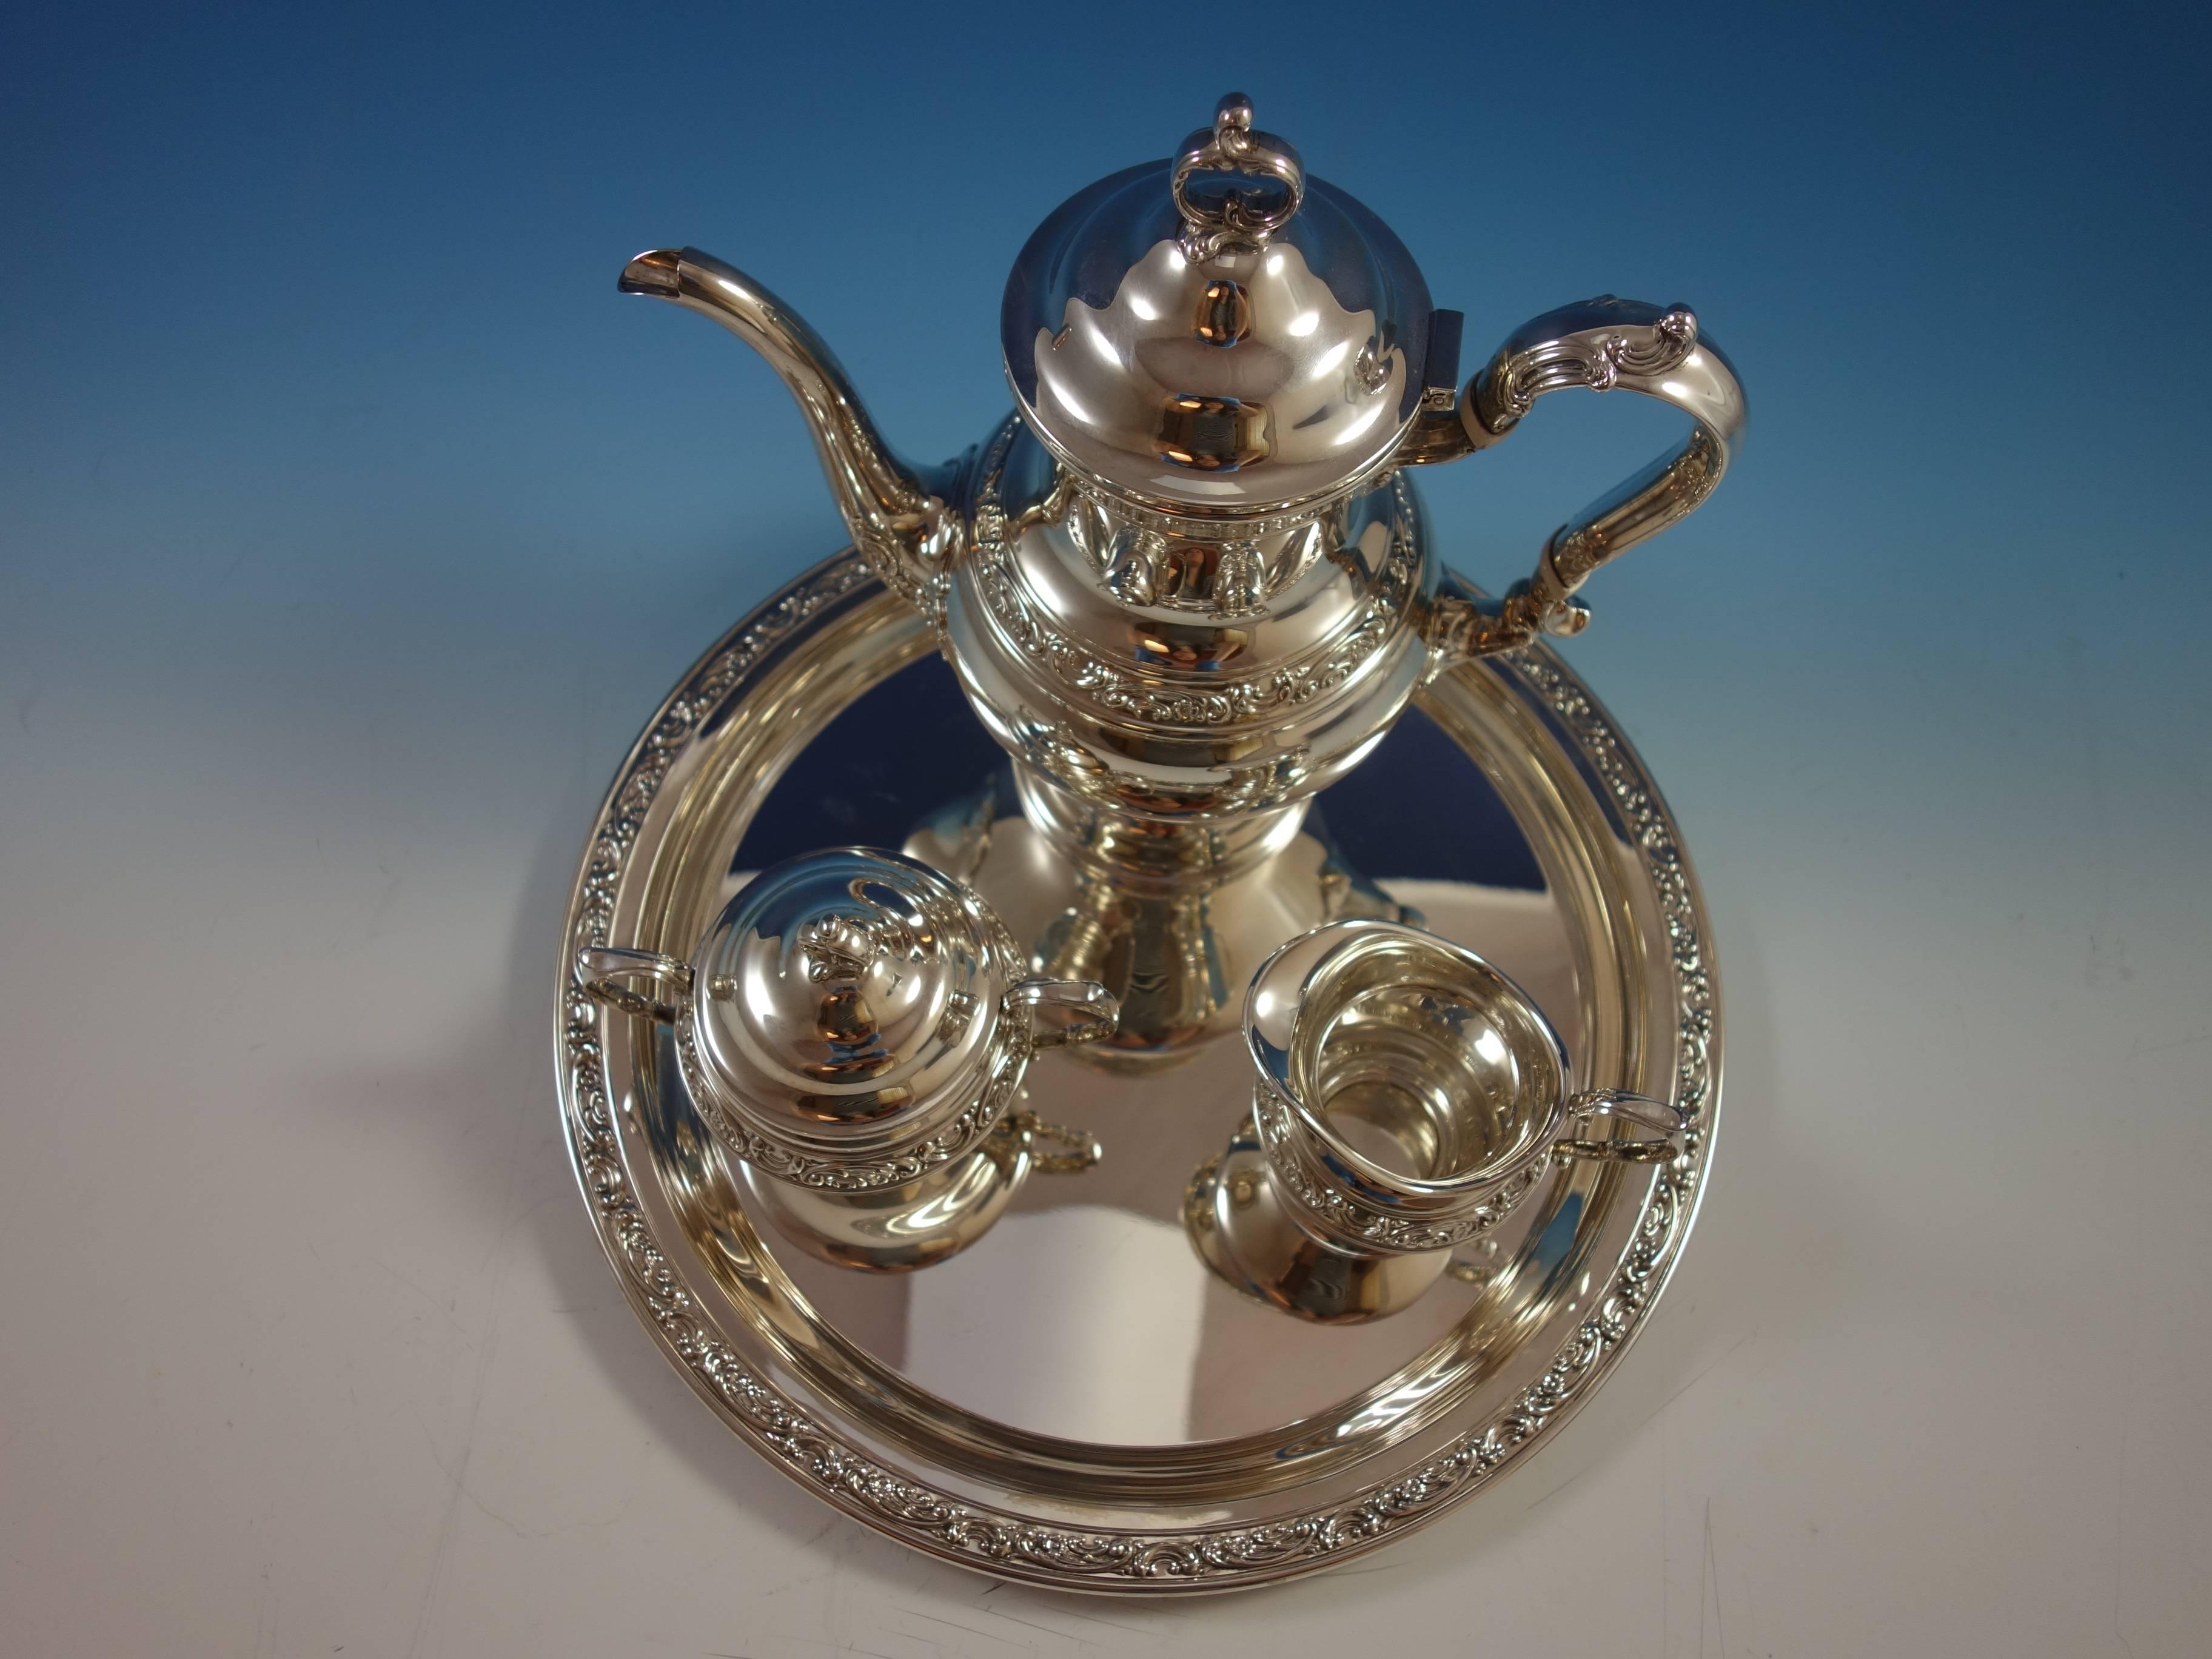 Beautiful Strasbourg by Gorham sterling silver three-piece tea set with an elegant round tray. The tea set is not monogrammed. The tray is marked #1230, measures 5/8